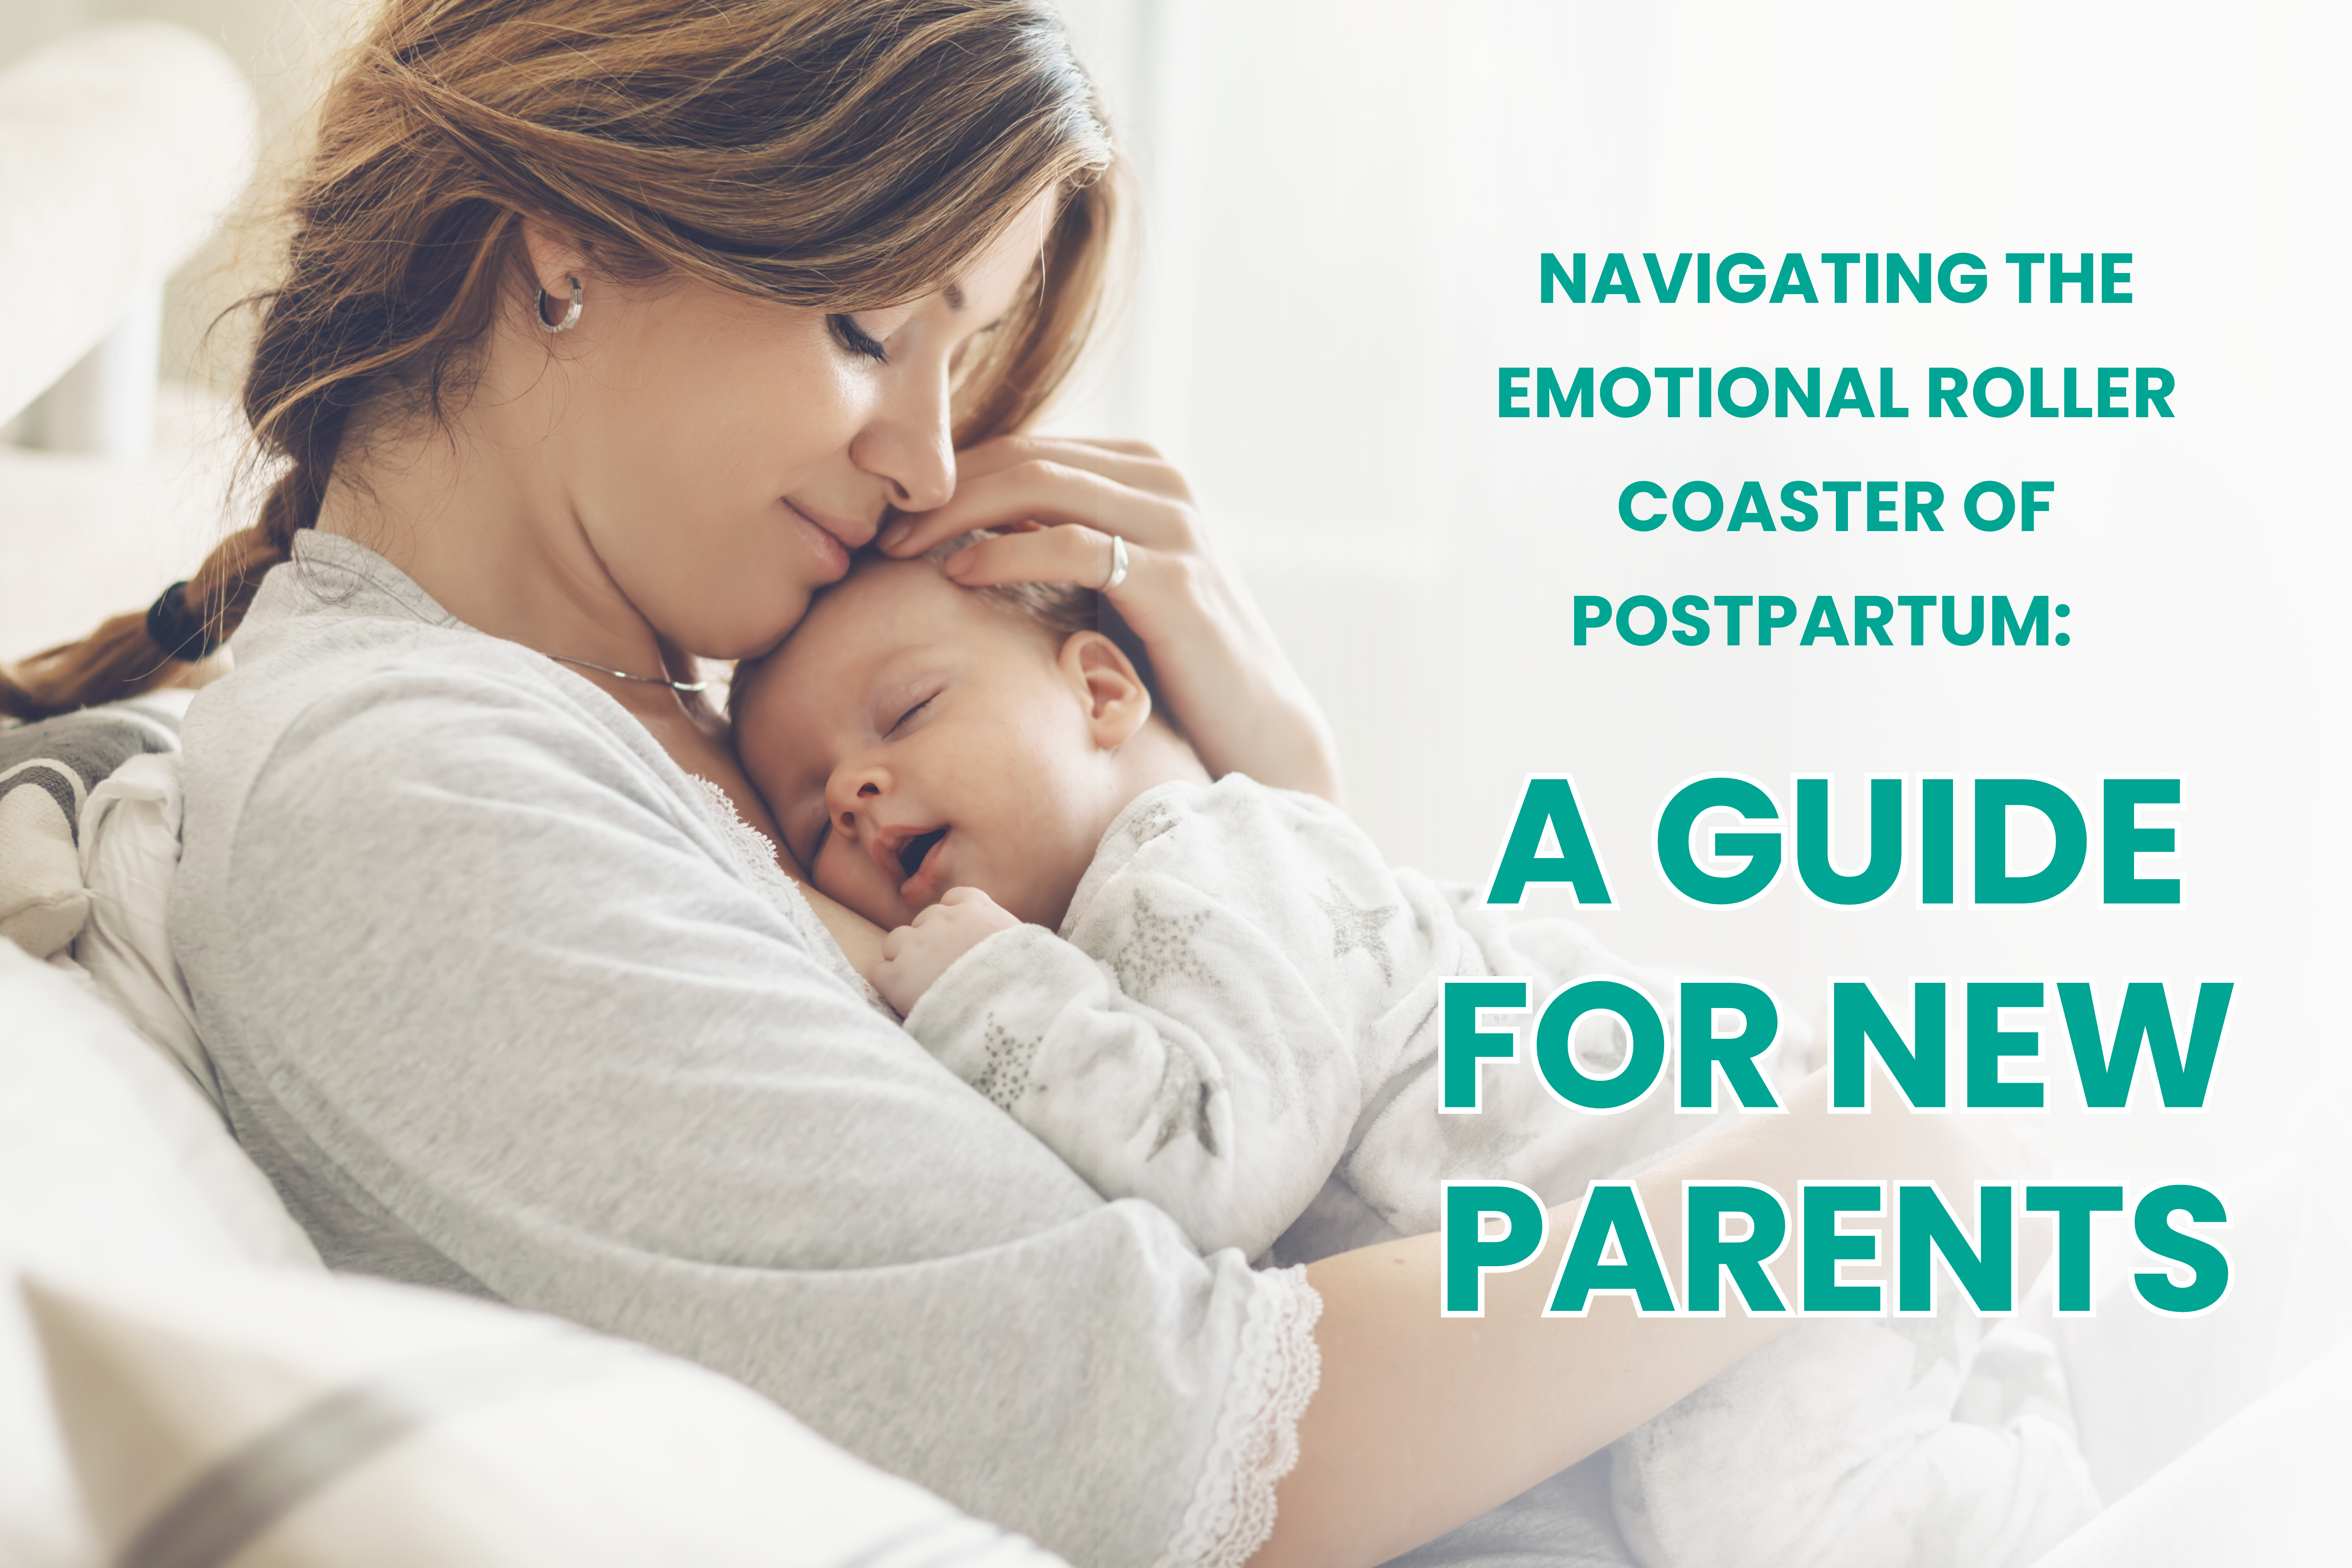 Navigating the Emotional Roller Coaster of Postpartum: A Guide for New Parents